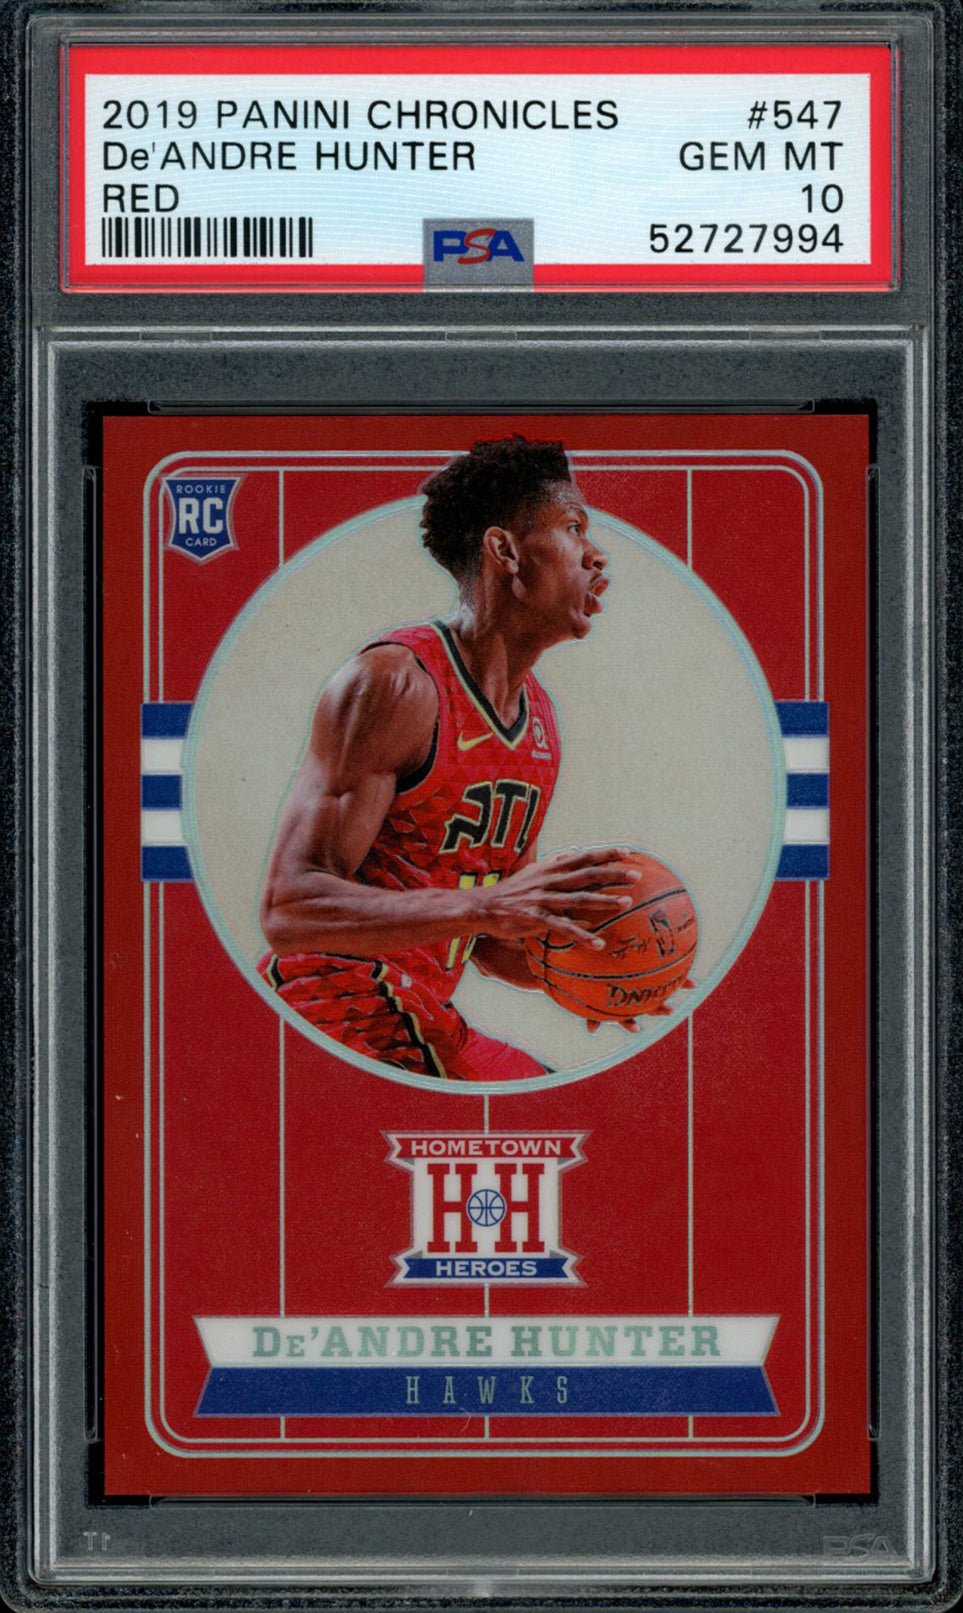 DE'ANDRE HUNTER PSA 10 2019-20 Panini Chronicles Hometown Heroes Red Prizm #547 6/149 Basketball Graded Cards Parallel RC - Hobby Gems